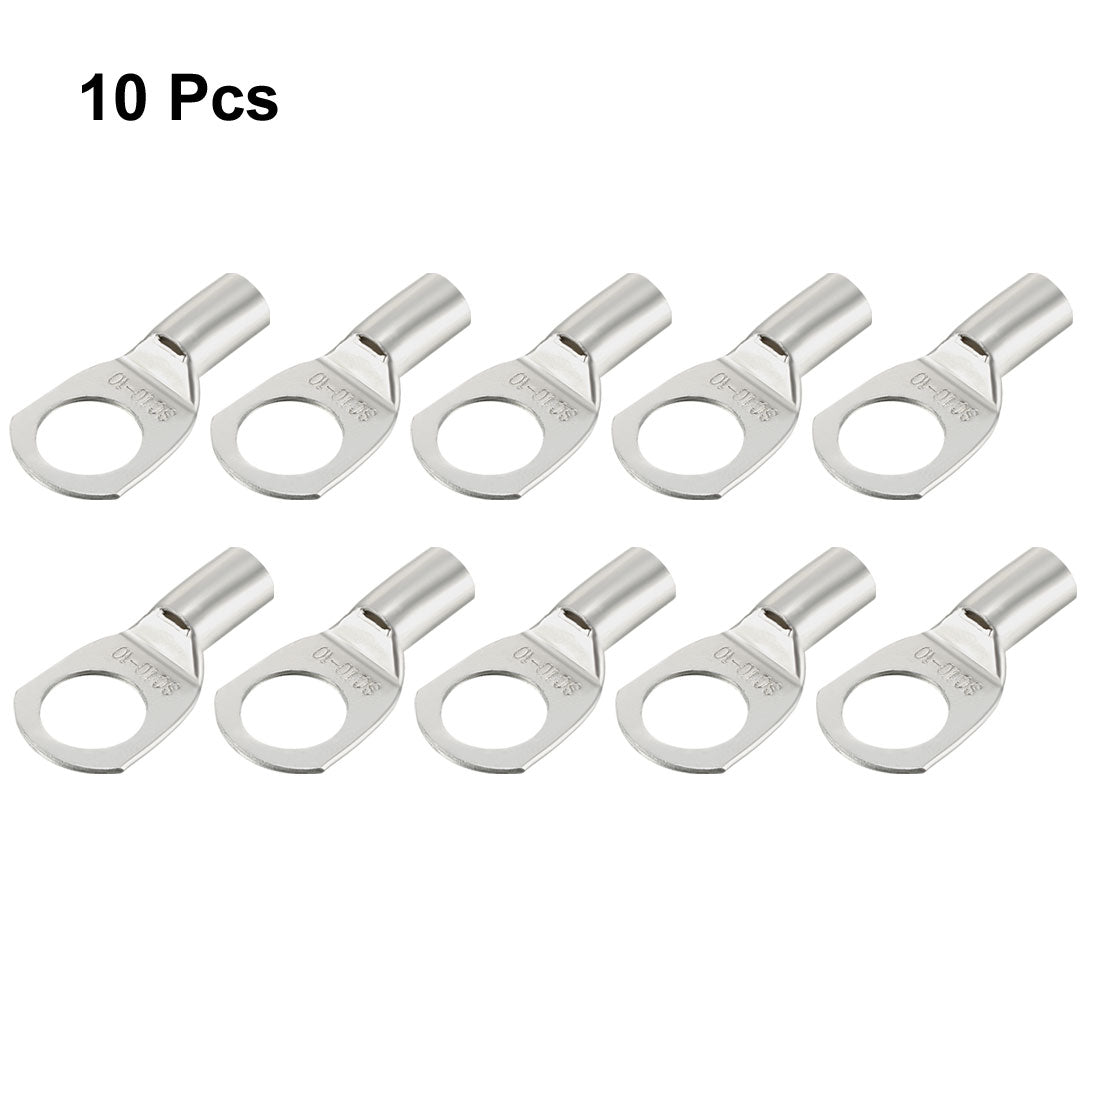 uxcell Uxcell 10Pcs SC10-10 Non-Insulated U-Type Copper Crimp Terminals 10mm2 Wire Connector Silver Tone